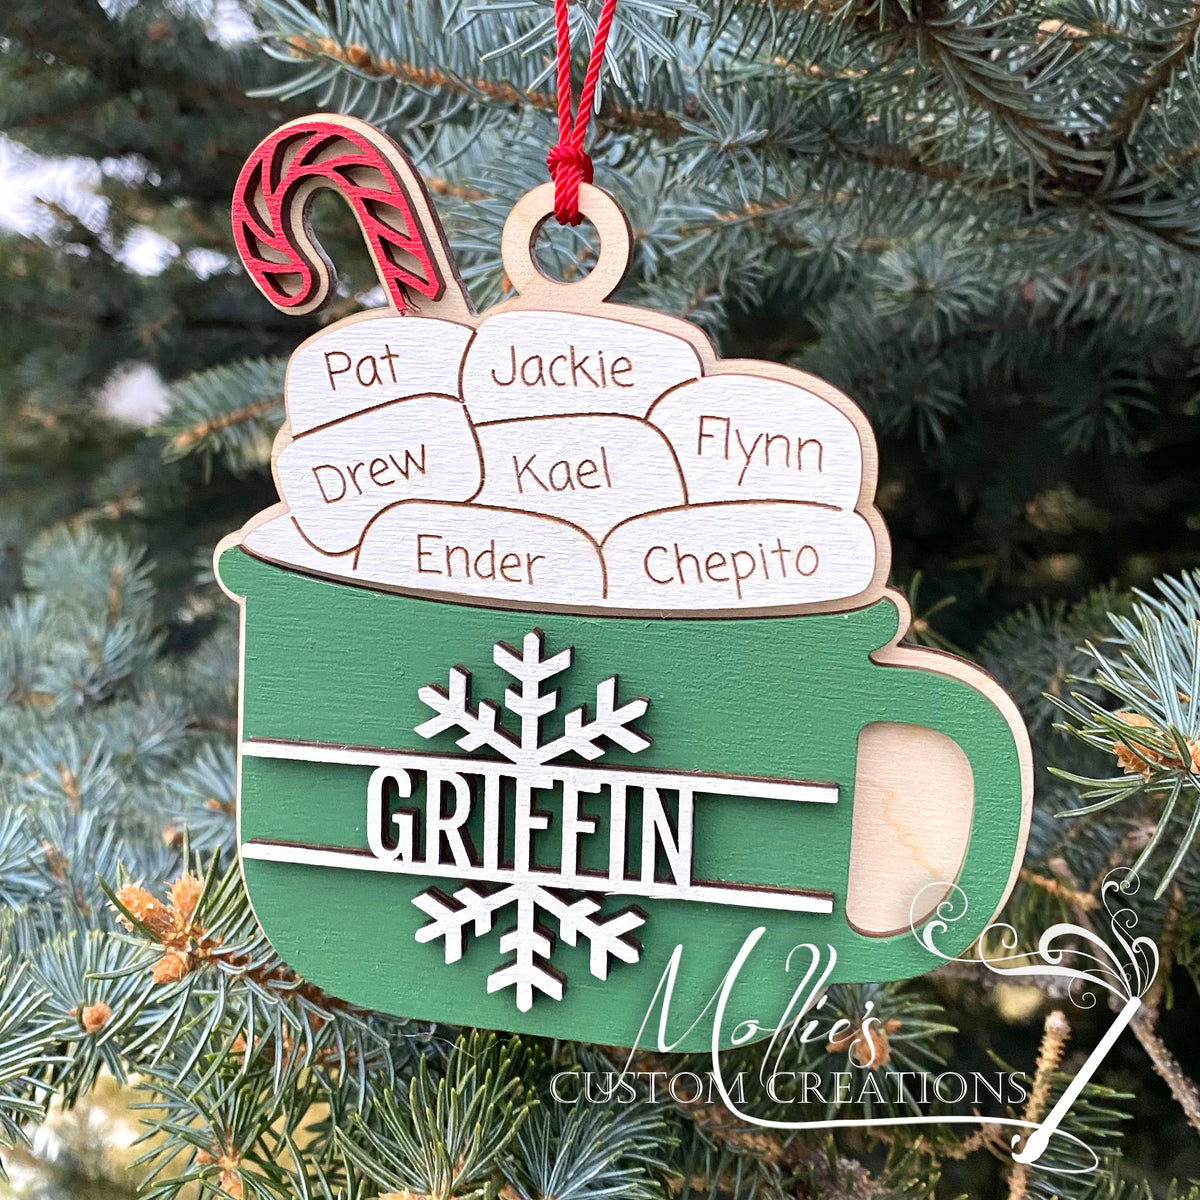 Family Christmas Ornament with Round Baubles, Personalized with Names –  Mollie's Custom Creations